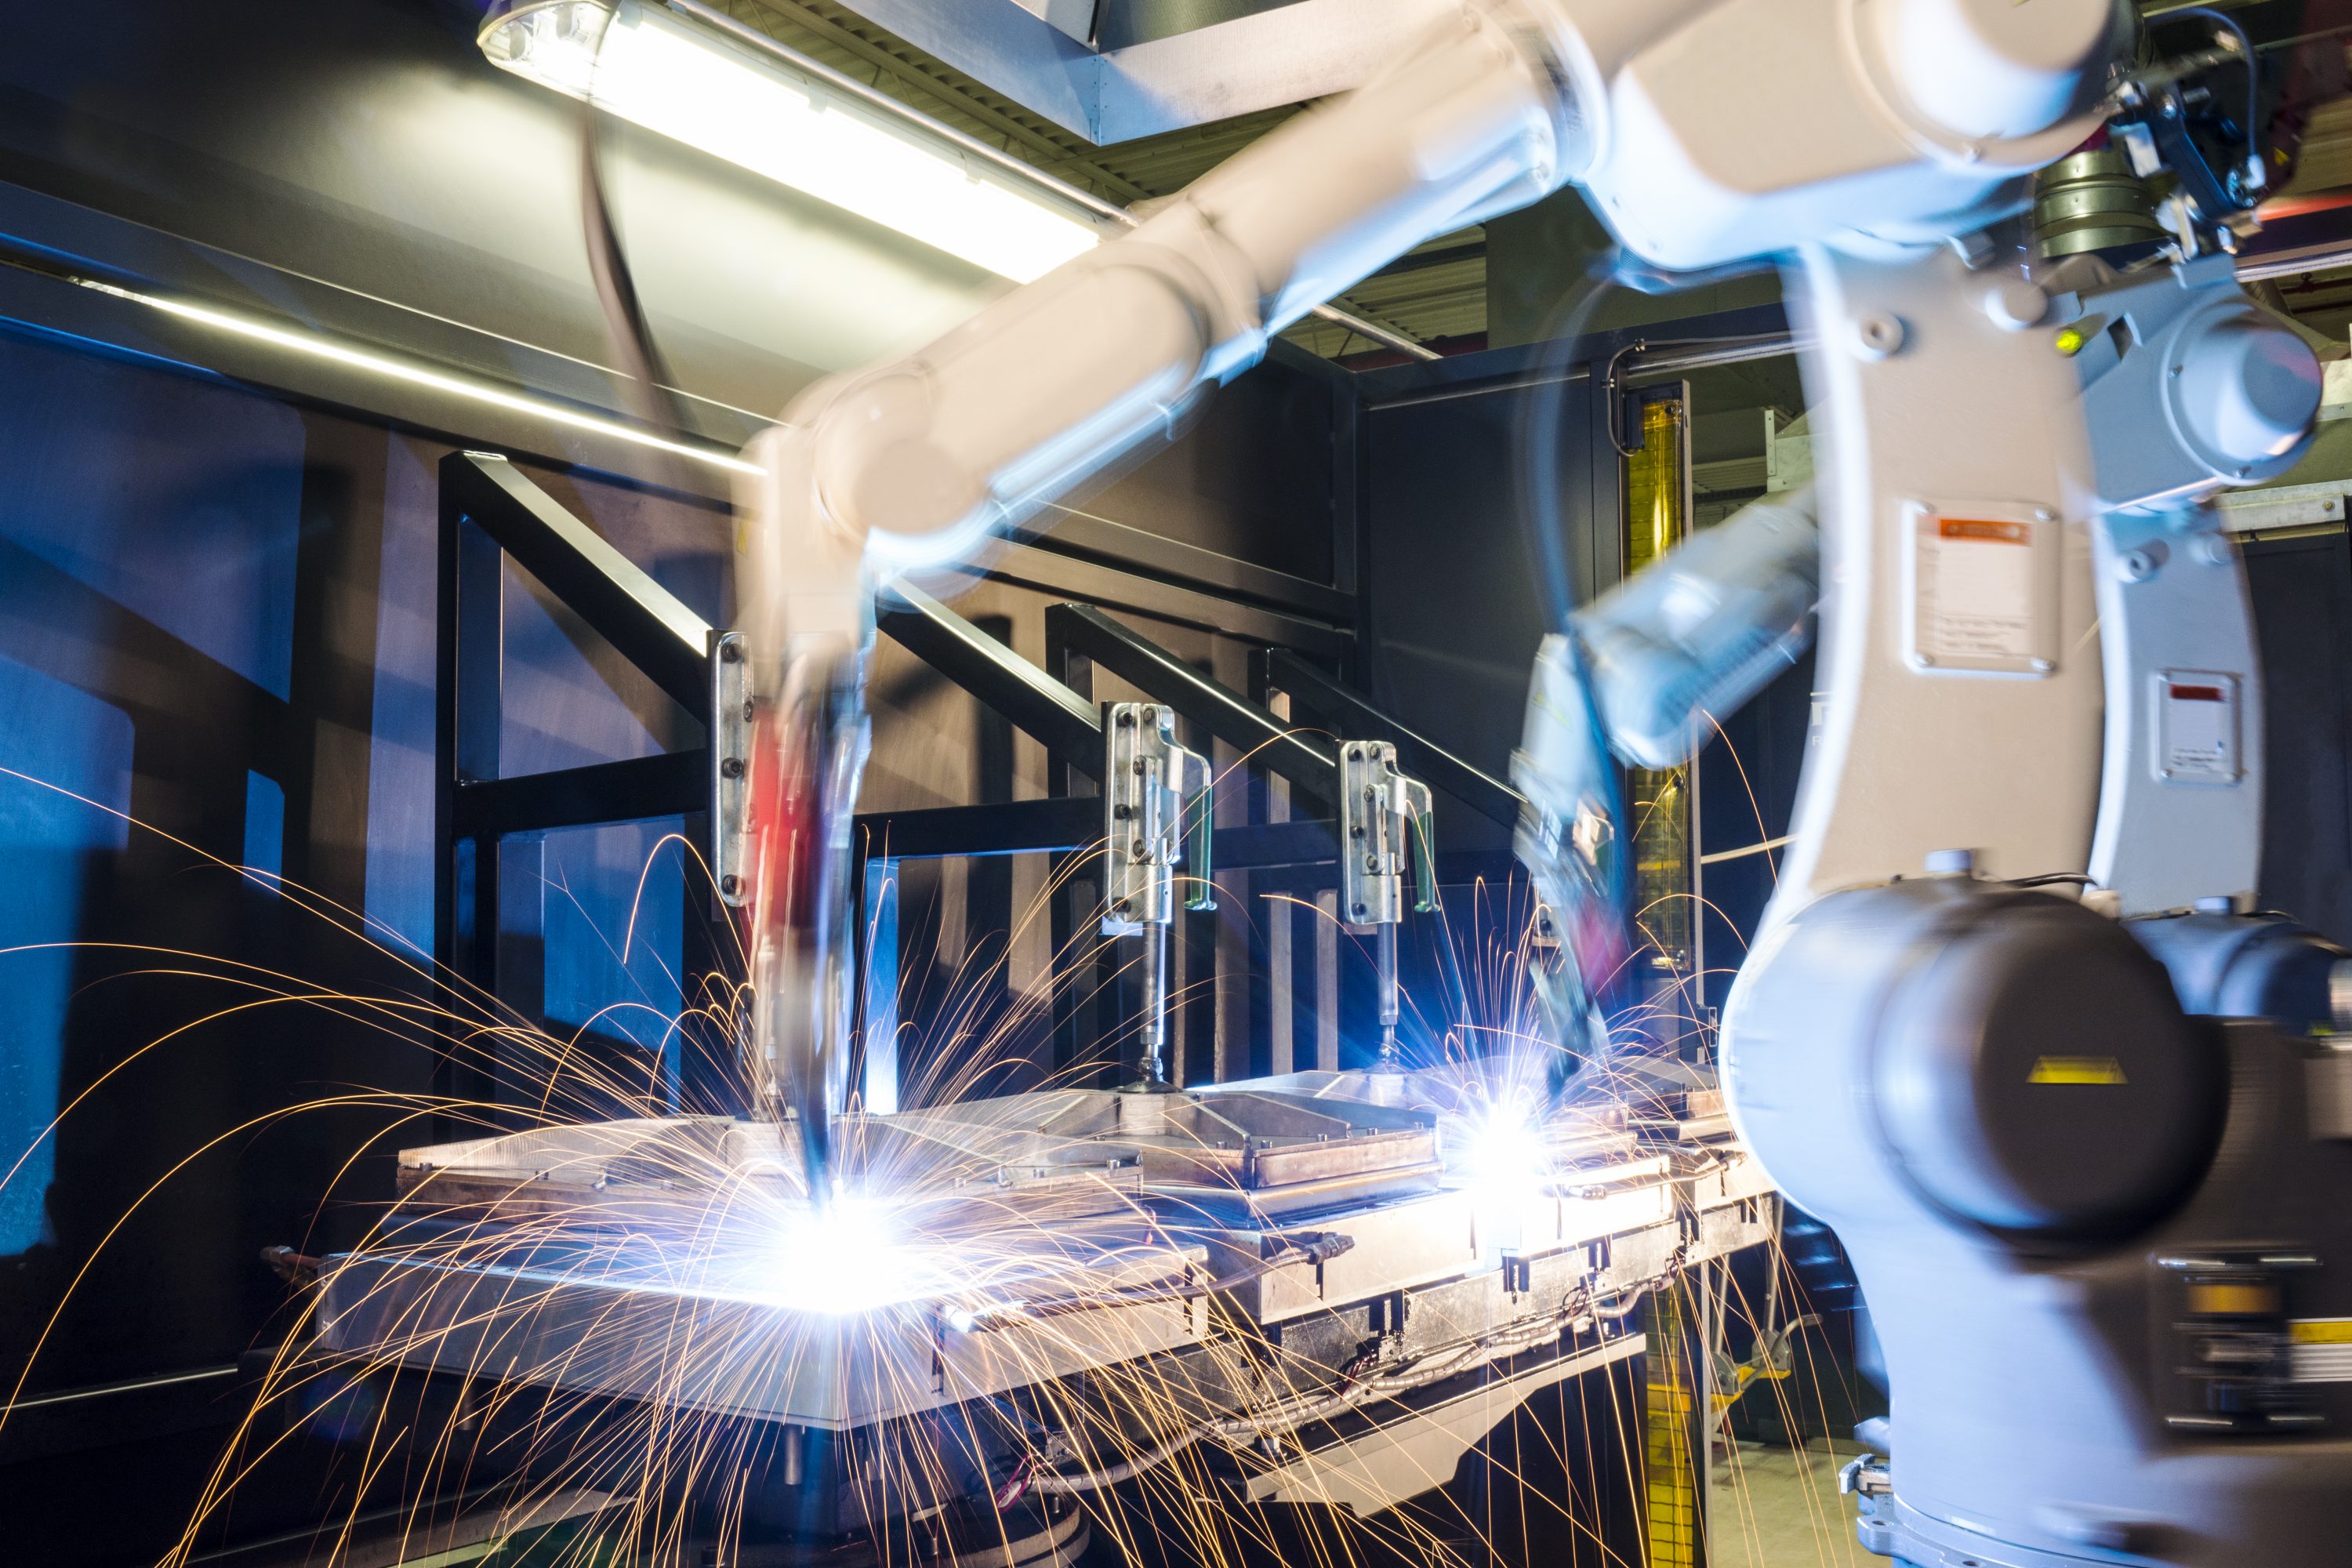 High-tech, industrial robotic welding machines in operation. (Getty Images)